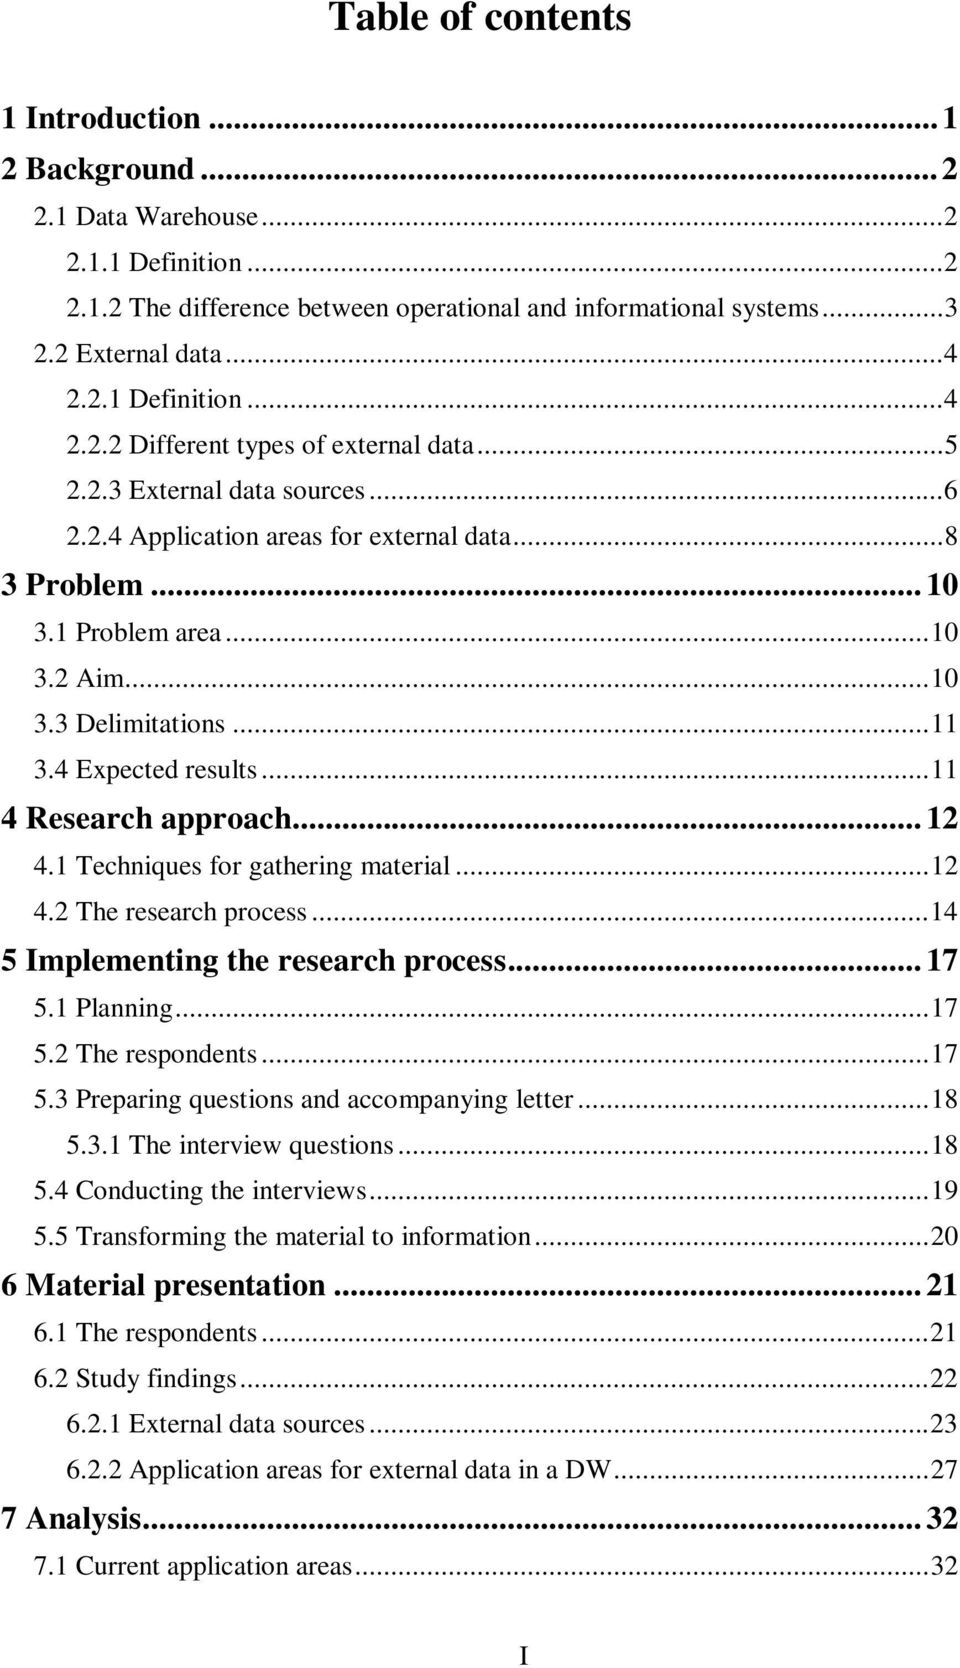 .. 12 4.1 Techniques for gathering material...12 4.2 The research process...14 5 Implementing the research process... 17 5.1 Planning...17 5.2 The respondents...17 5.3 Preparing questions and accompanying letter.